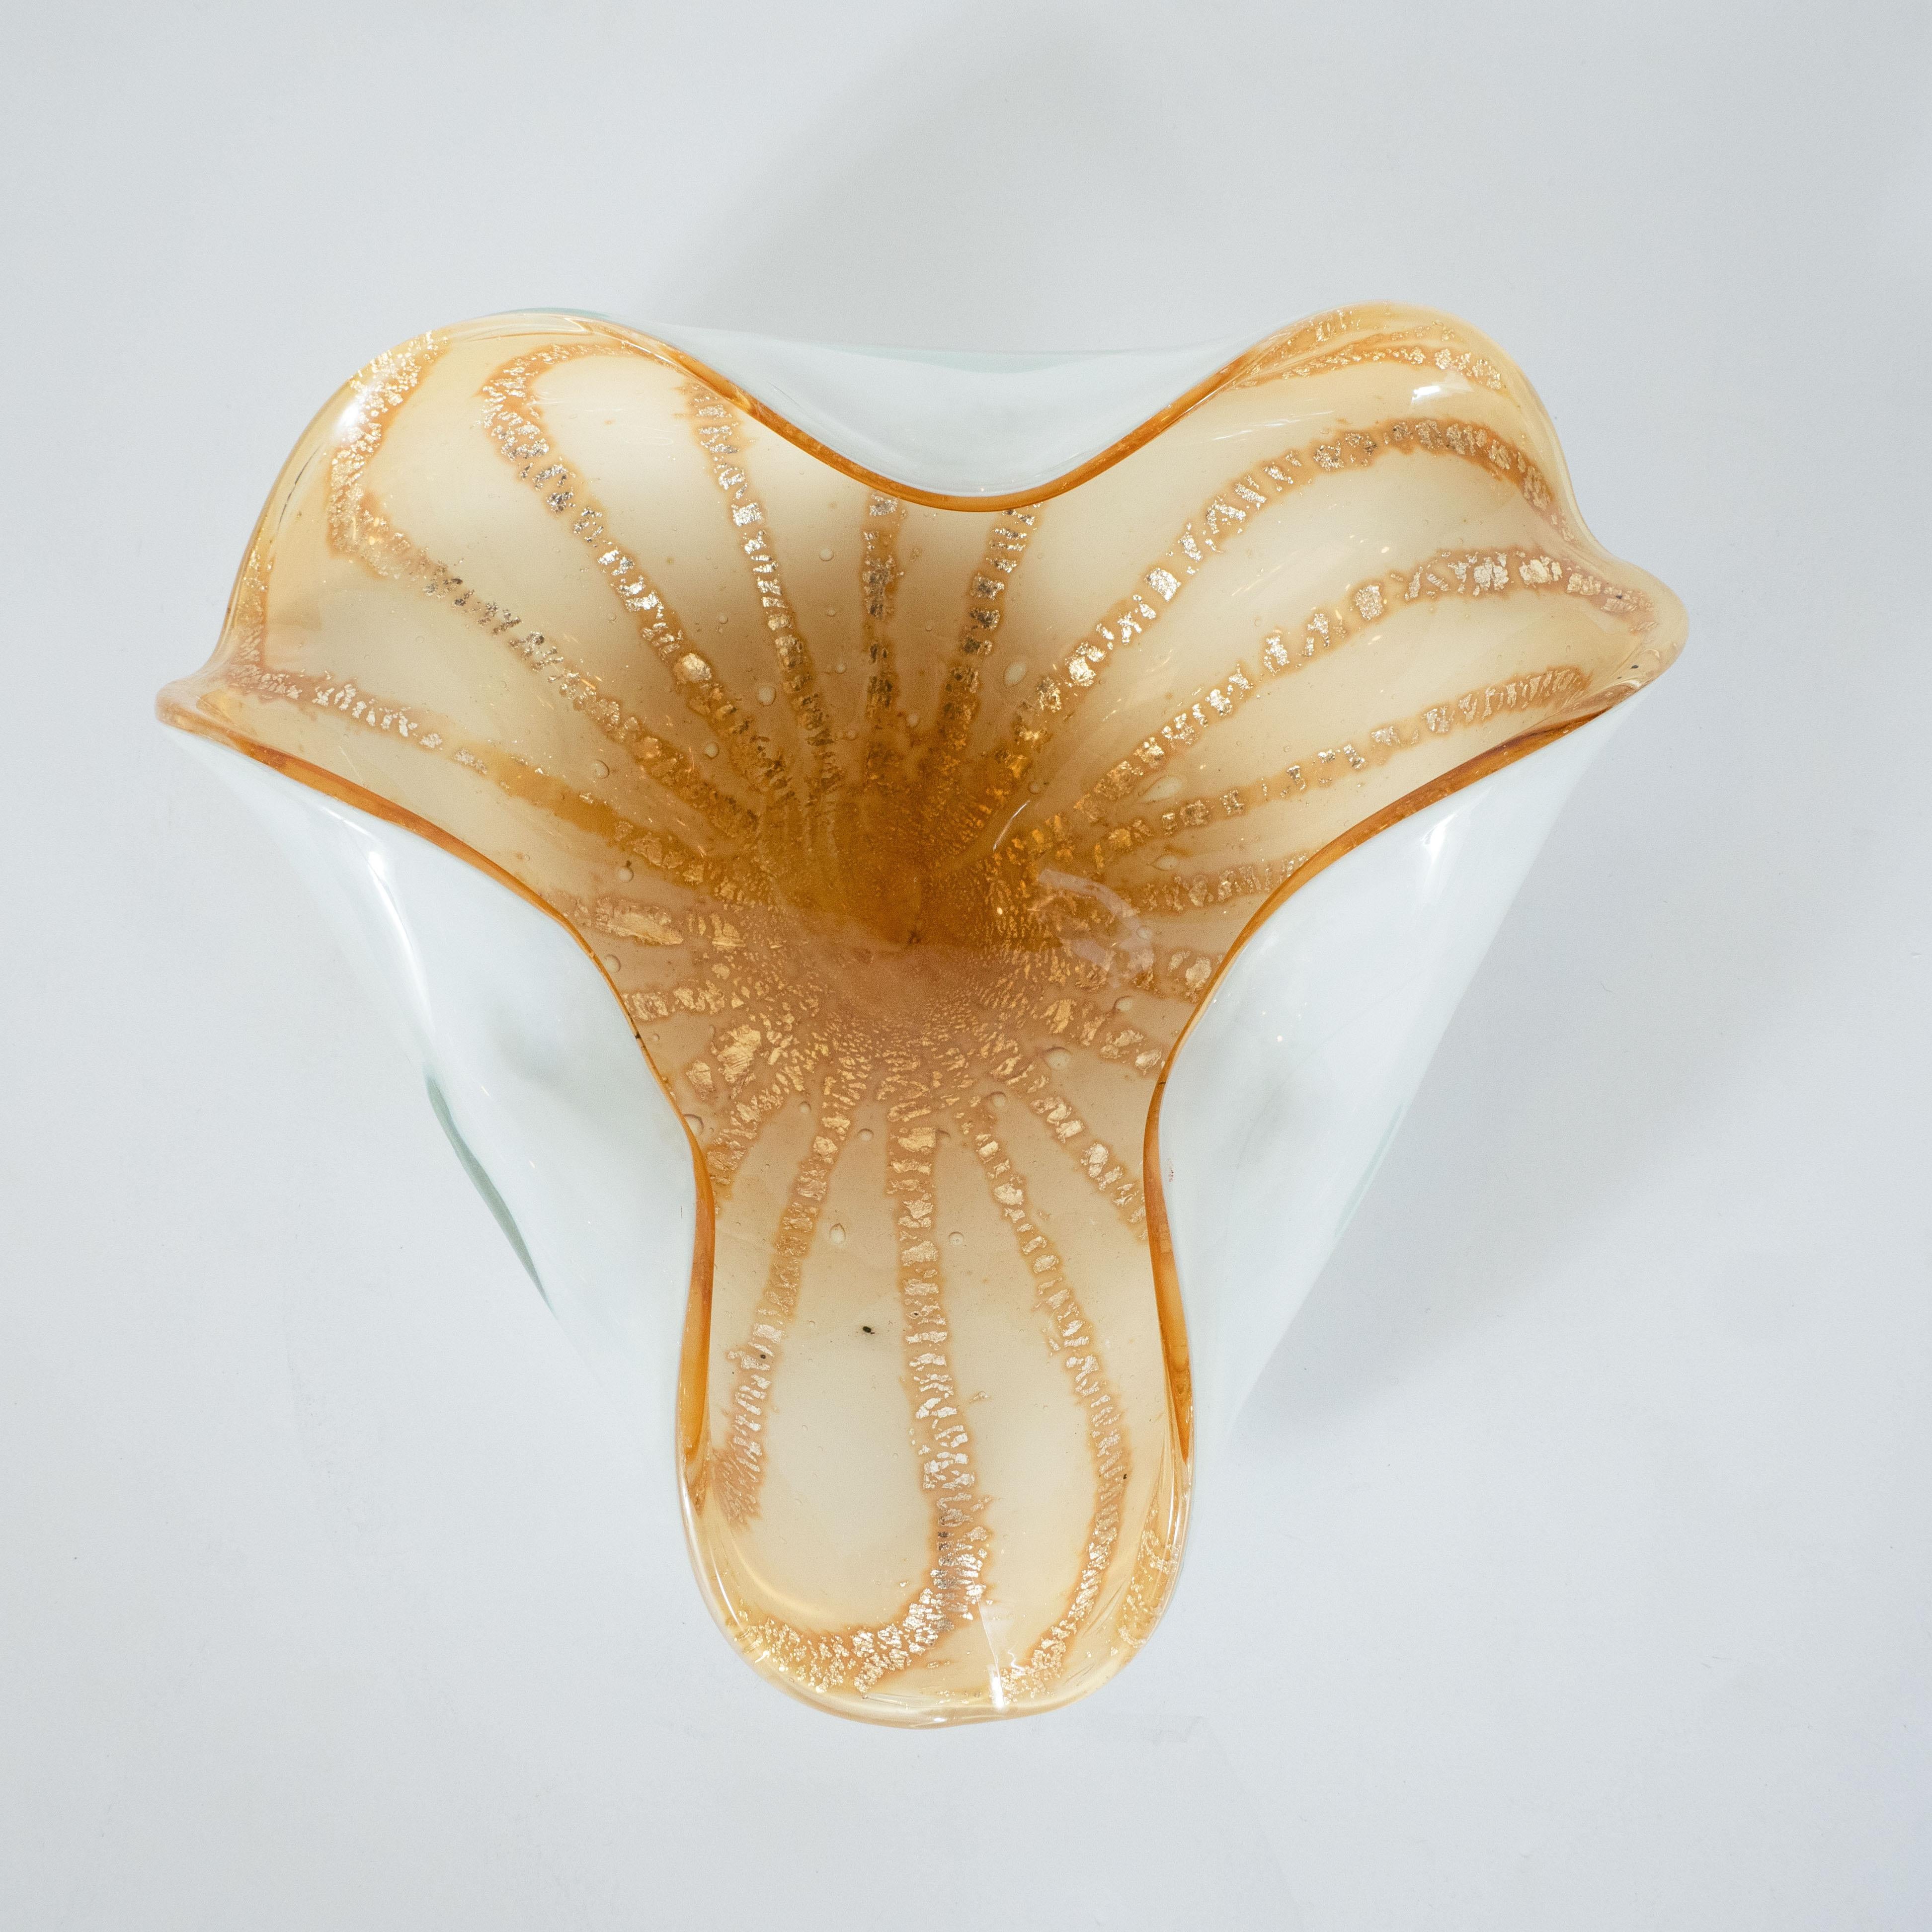 This dynamic Mid-Century Modern bowl was hand blown on the fabled island of Murano, Italy, off the coast of Venice renowned for centuries for its superlative glass production. This piece features a white exterior with flowing and sinuous curves